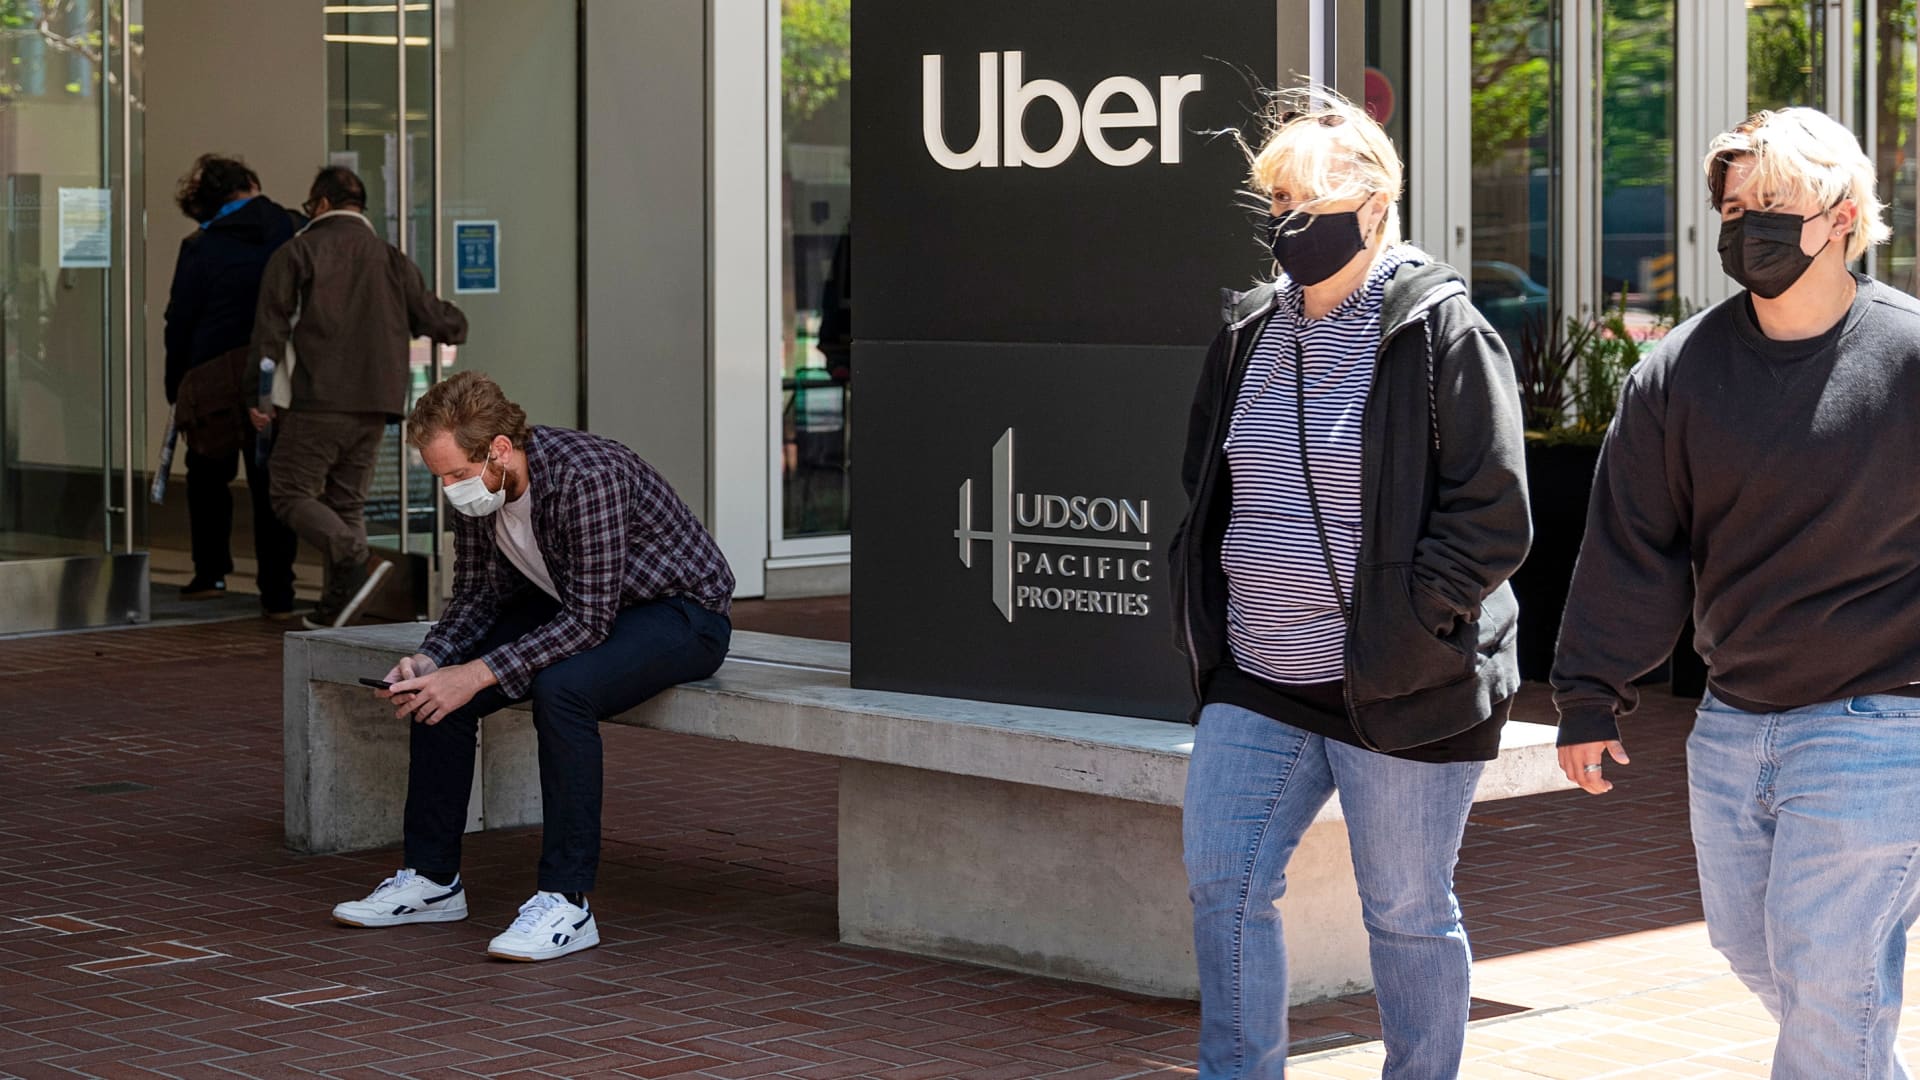 People wear protective masks in front of Uber Technologies Inc. headquarters in San Francisco, California, U.S., on Wednesday, June 9, 2021.